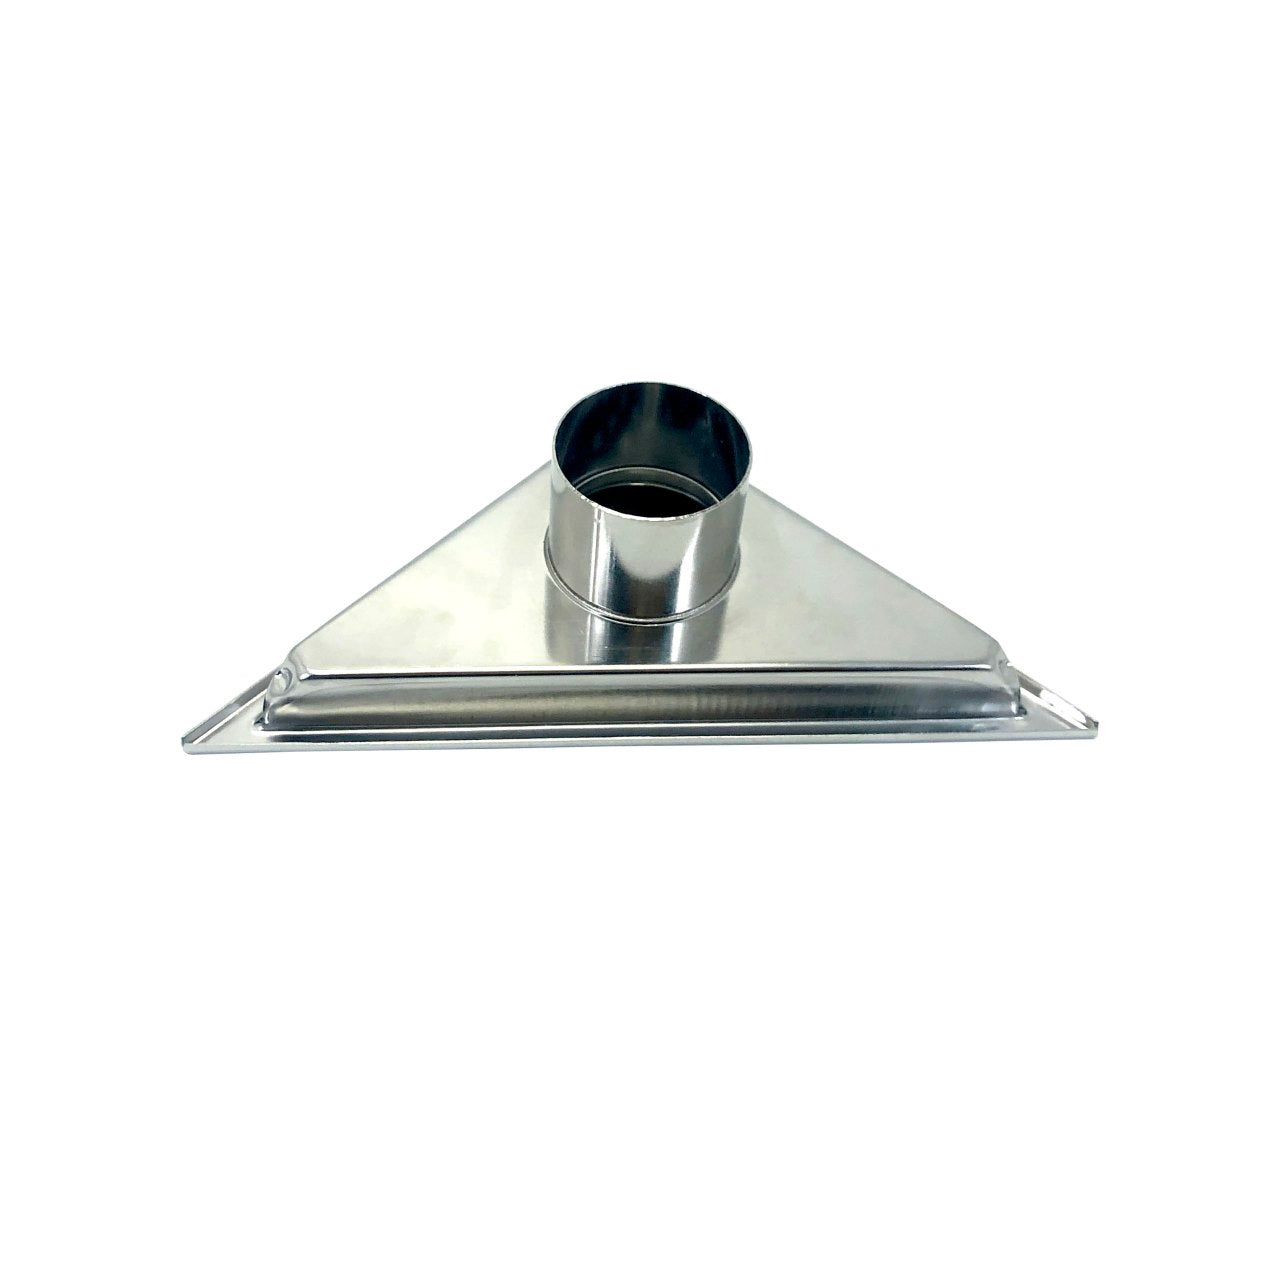 Kube 6.5″ Triangle Stainless Steel Pixel Grate – Chrome